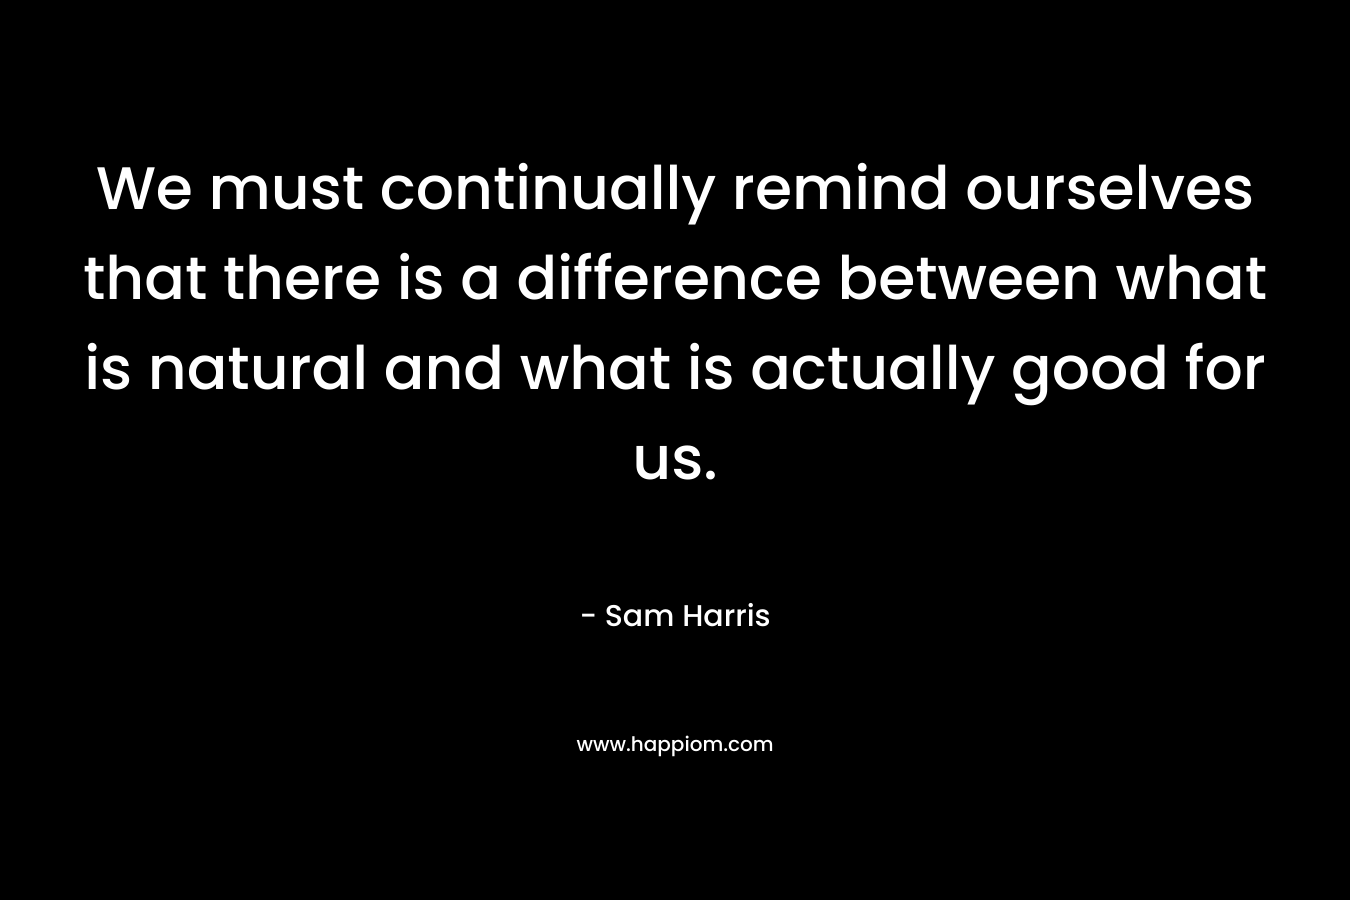 We must continually remind ourselves that there is a difference between what is natural and what is actually good for us.